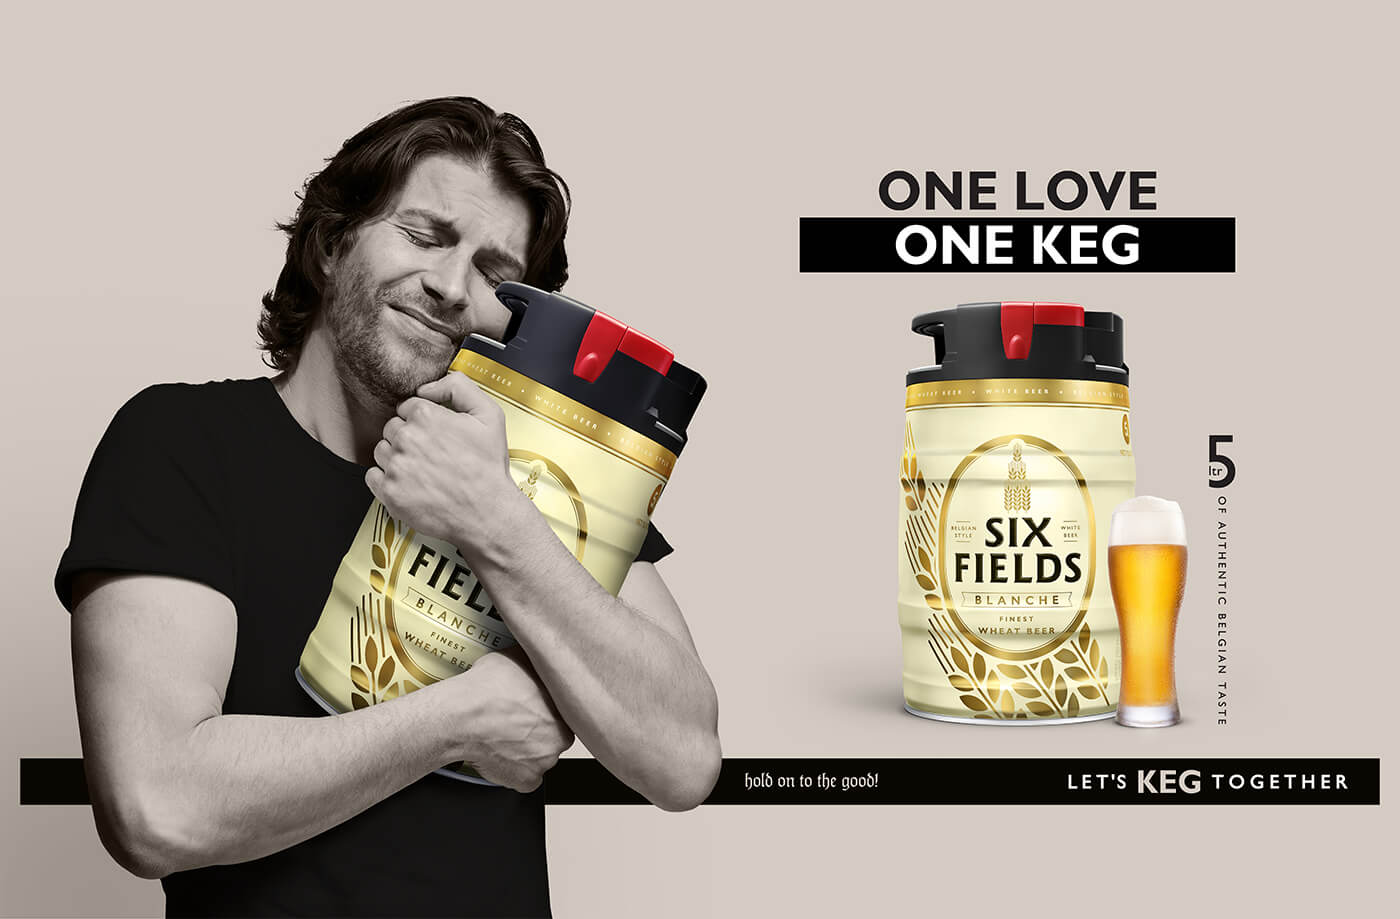 One Love One Keg- Campaign for a famous liquor brand Six Fields Blanche